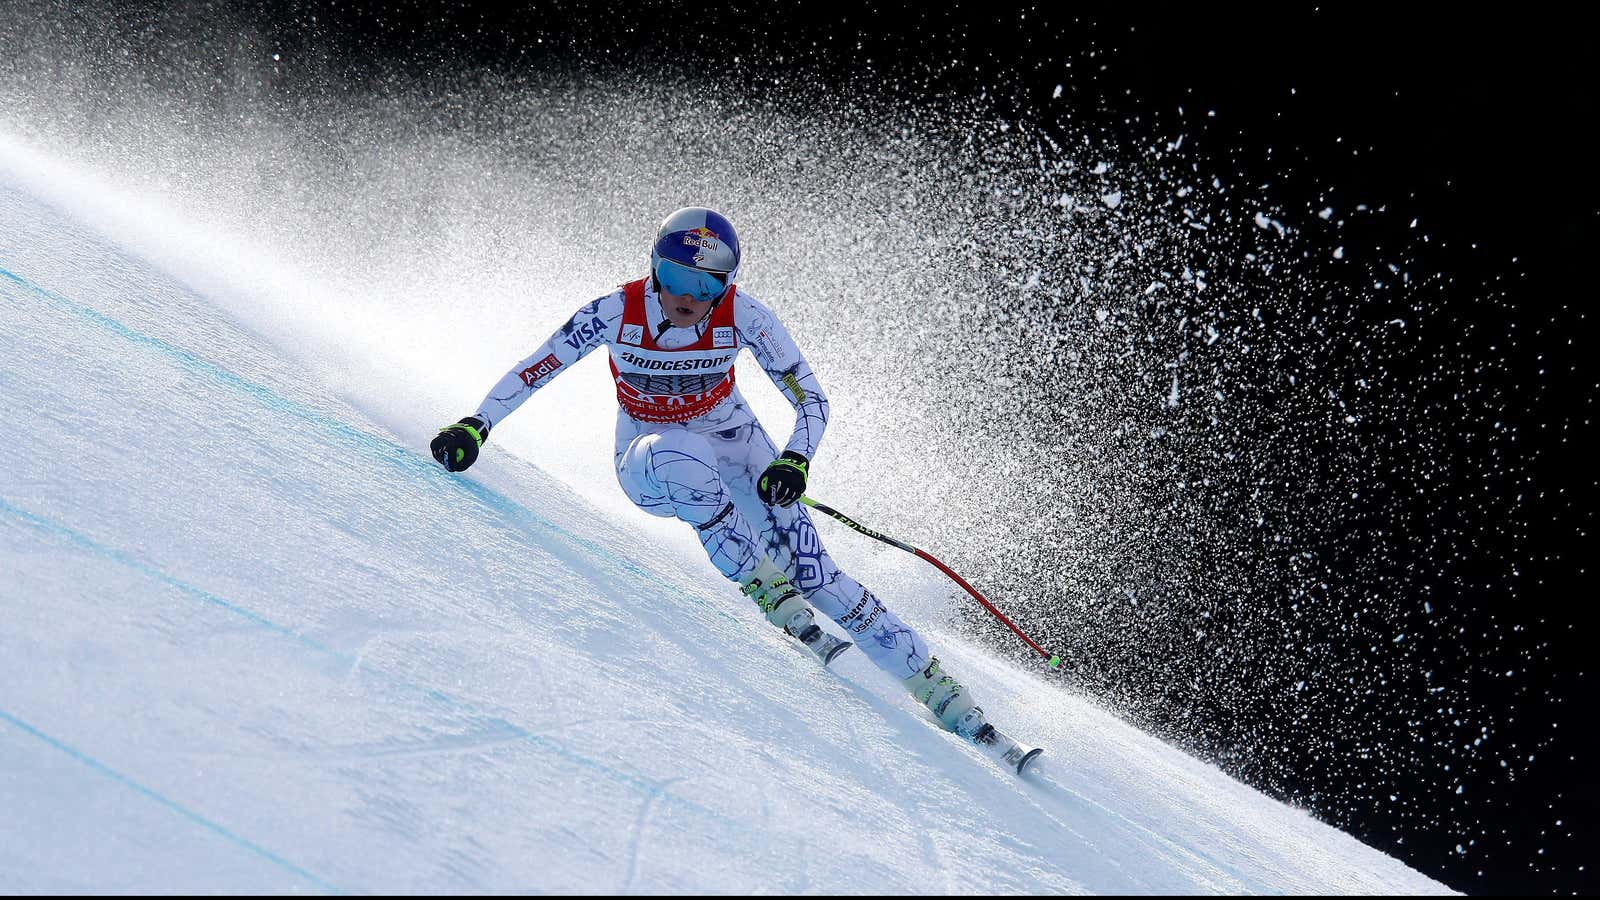 US Alpine skiier Lindsey Vonn is one of the Olympians profiled.